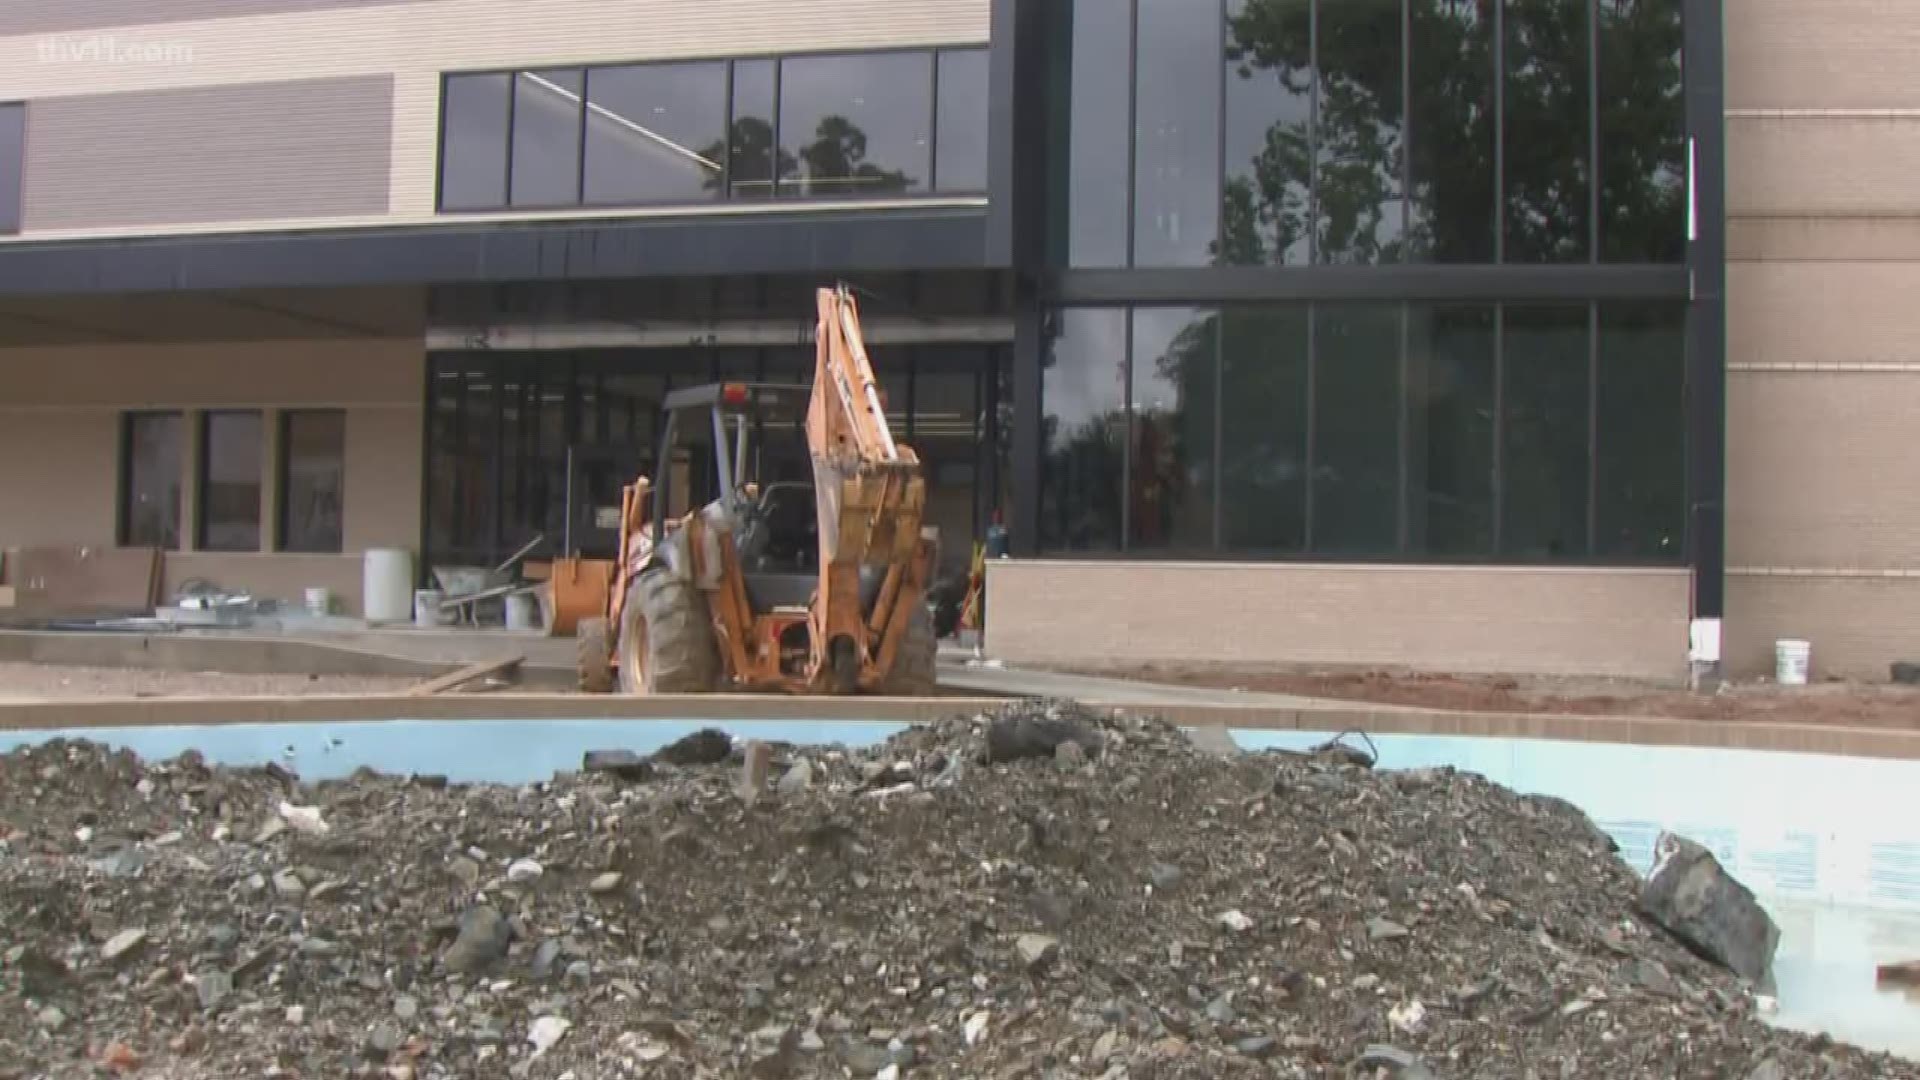 The Hot Springs School District is building a brand new state-of-the-art facility for Langston Magnet School, but this construction doesn't just mean new classrooms and hallways. THV11's Mercedes Mackay shows us how this new school building will connect the future to the past.